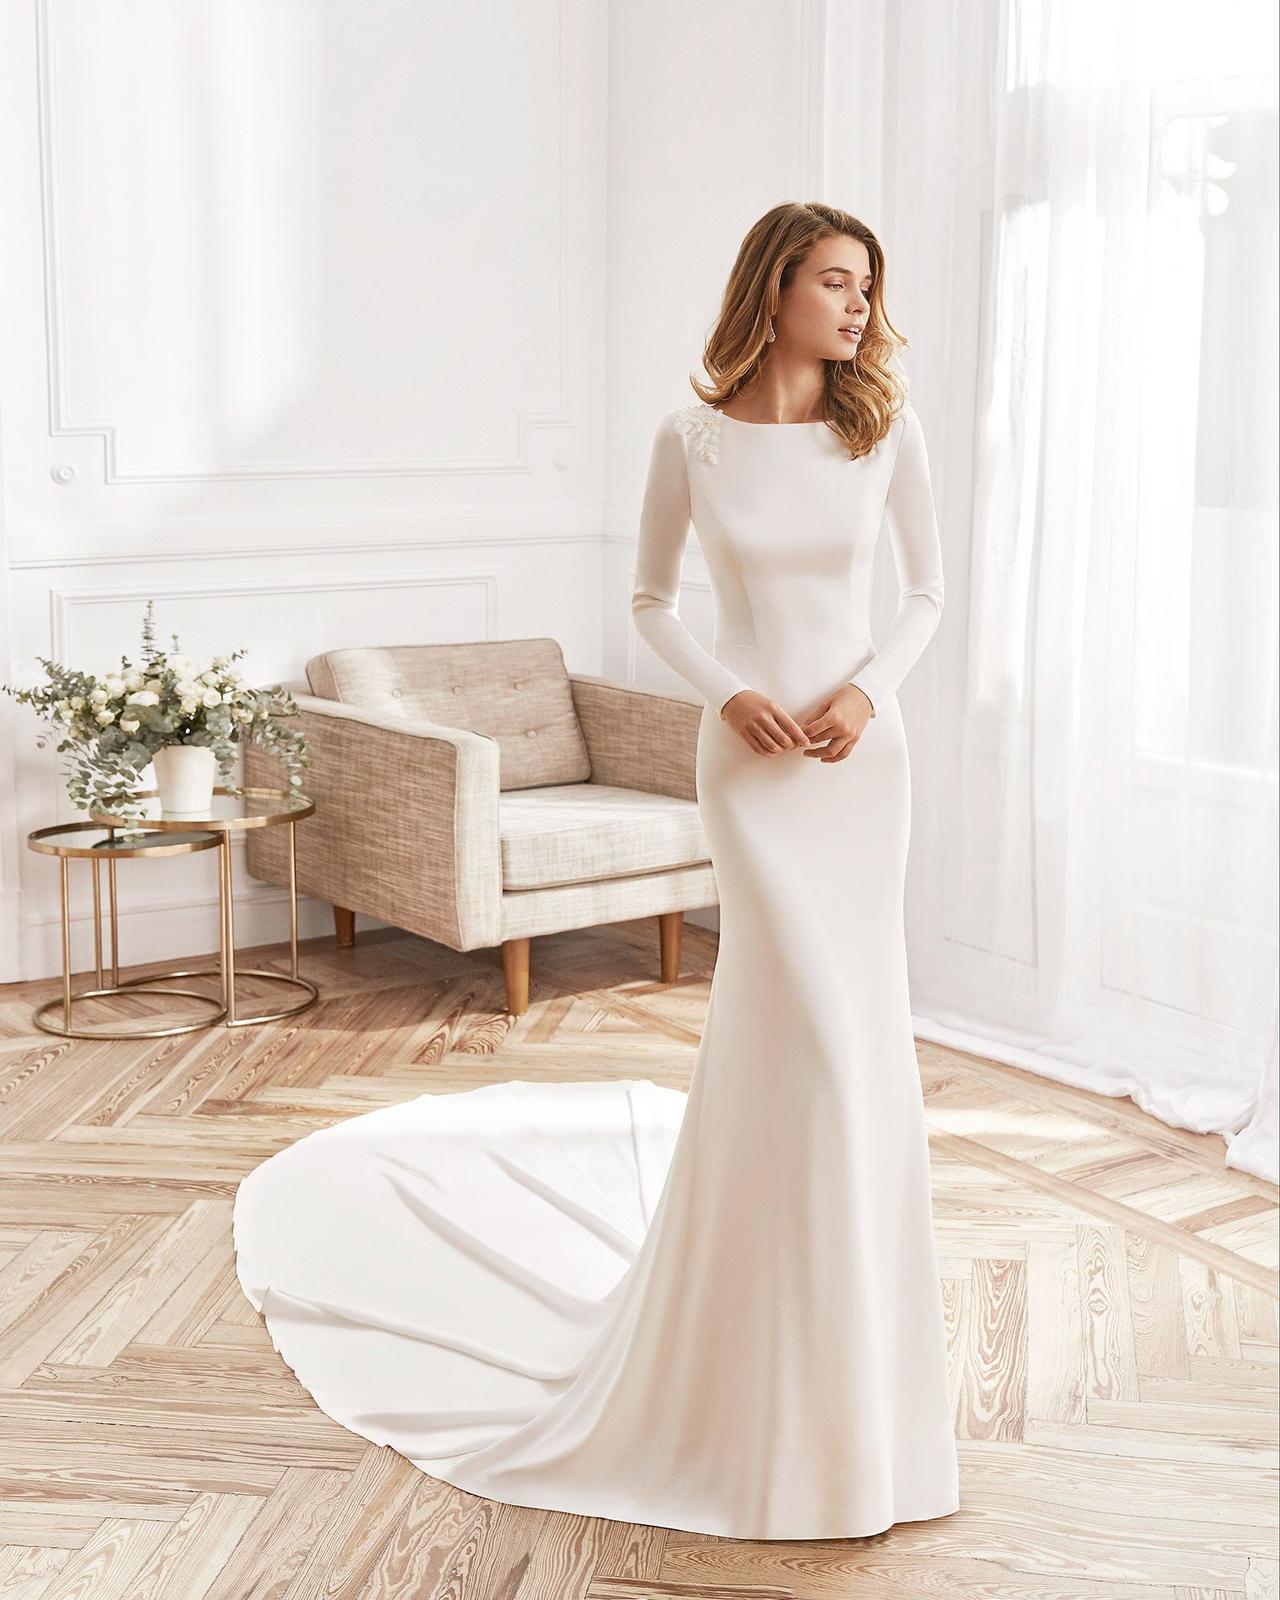 Wedding Dress Styles: 22 Shapes & Necklines You Need to Know